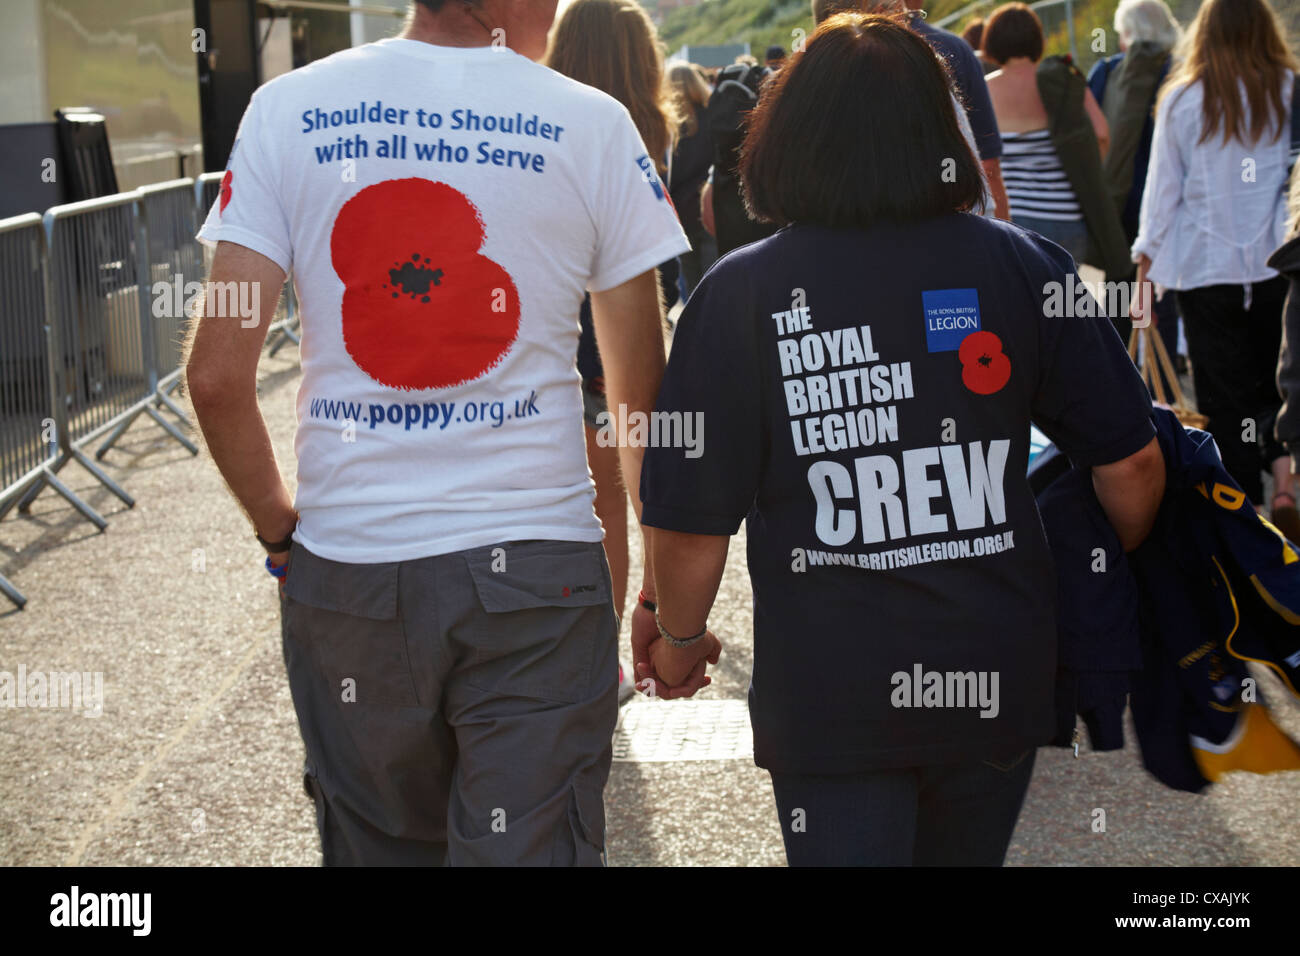 British Legion supporters wearing t-shirts advertising the poppy appeal at Bournemouth, Dorset in August Stock Photo